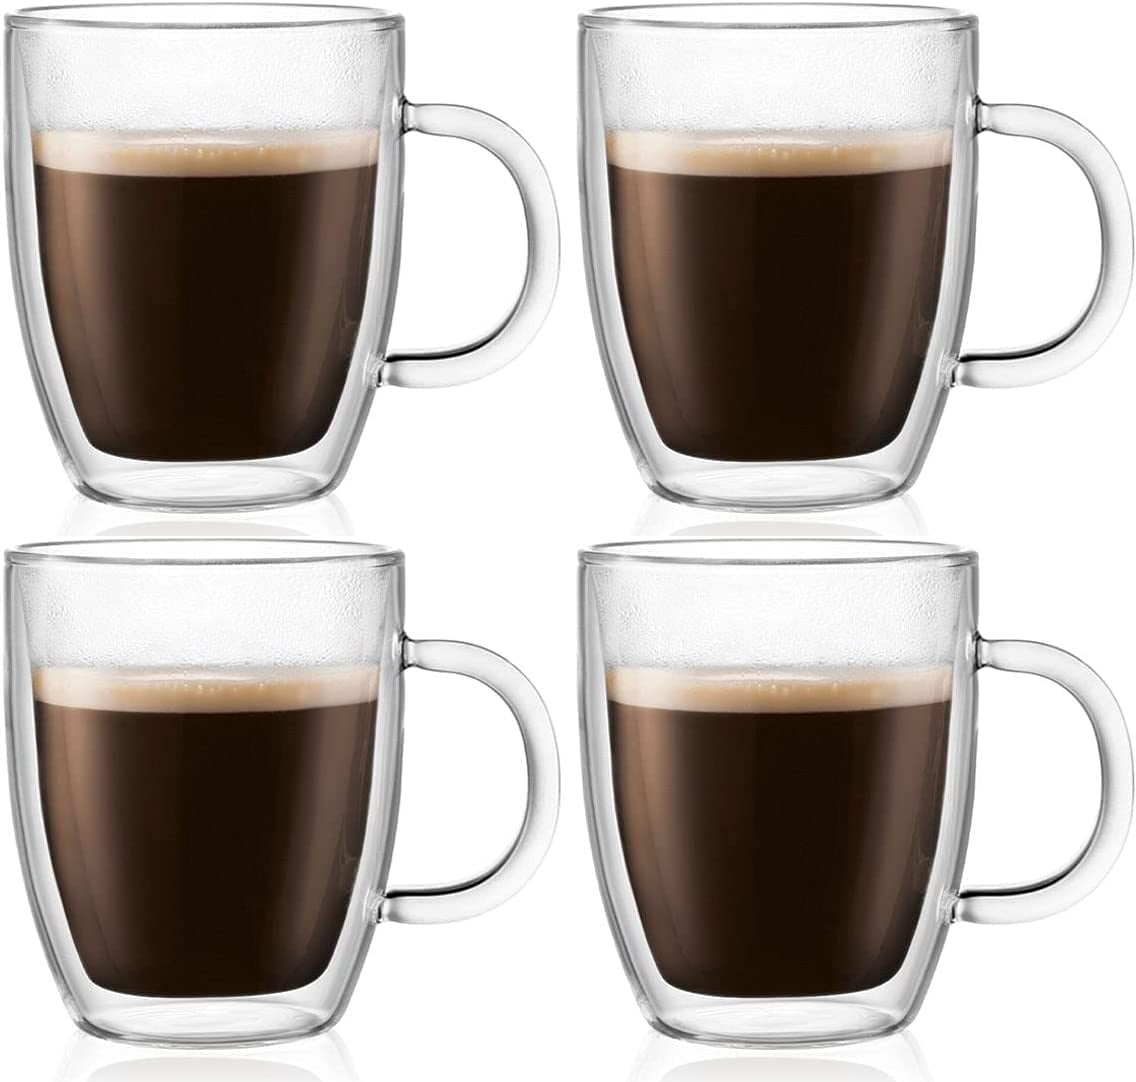 NEW Bodum Bistro Double Wall Thermo-Glasses Coffee Mug Set, 15.2 Ounce,  (4-pack)